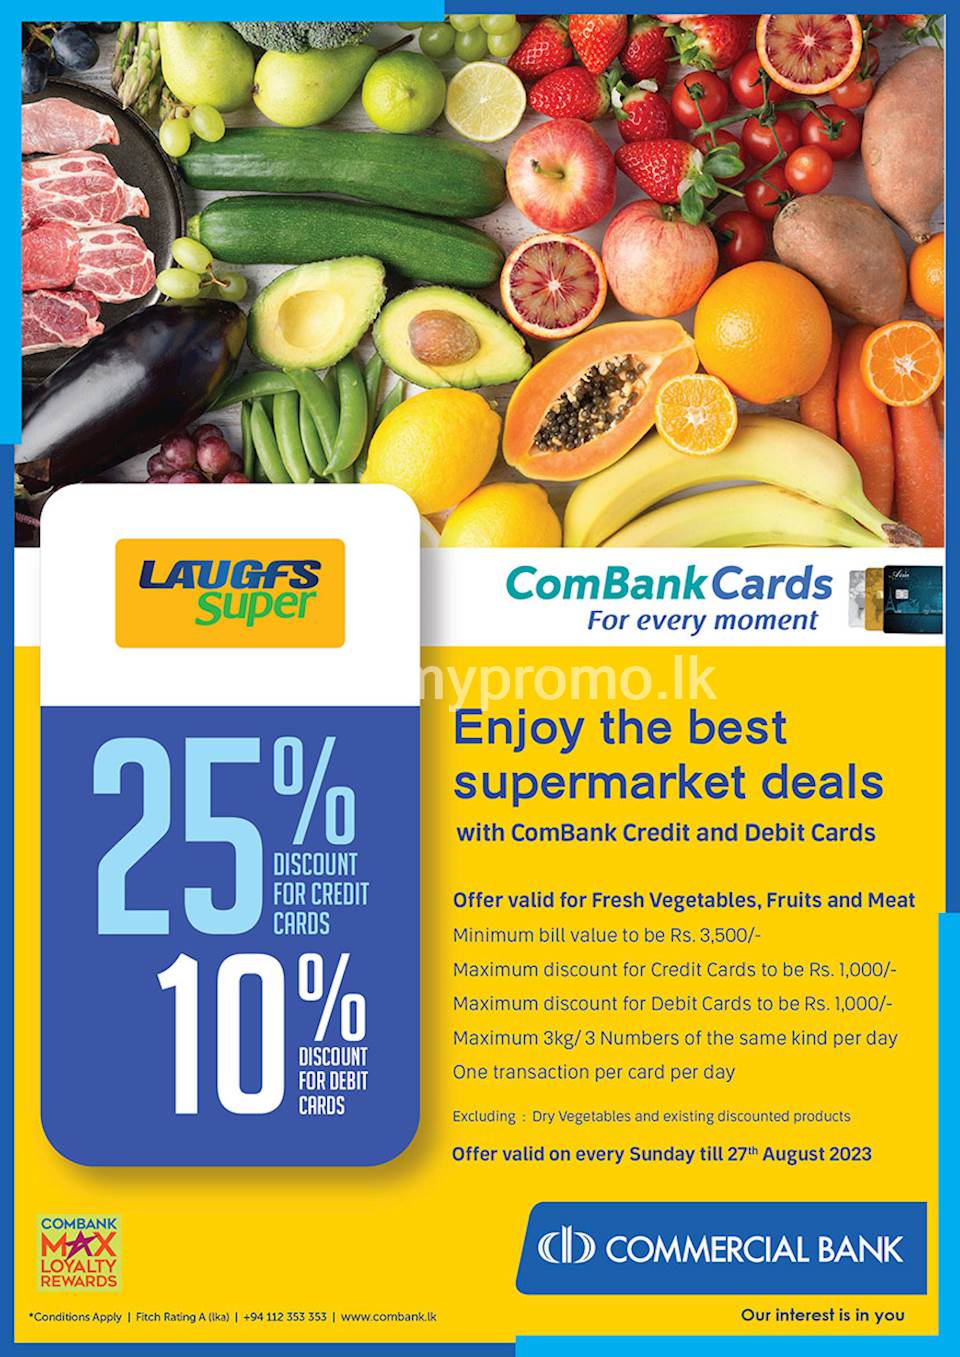 Enjoy the best supermarket deals at Laugfs Super with ComBank Credit and Debit Cards